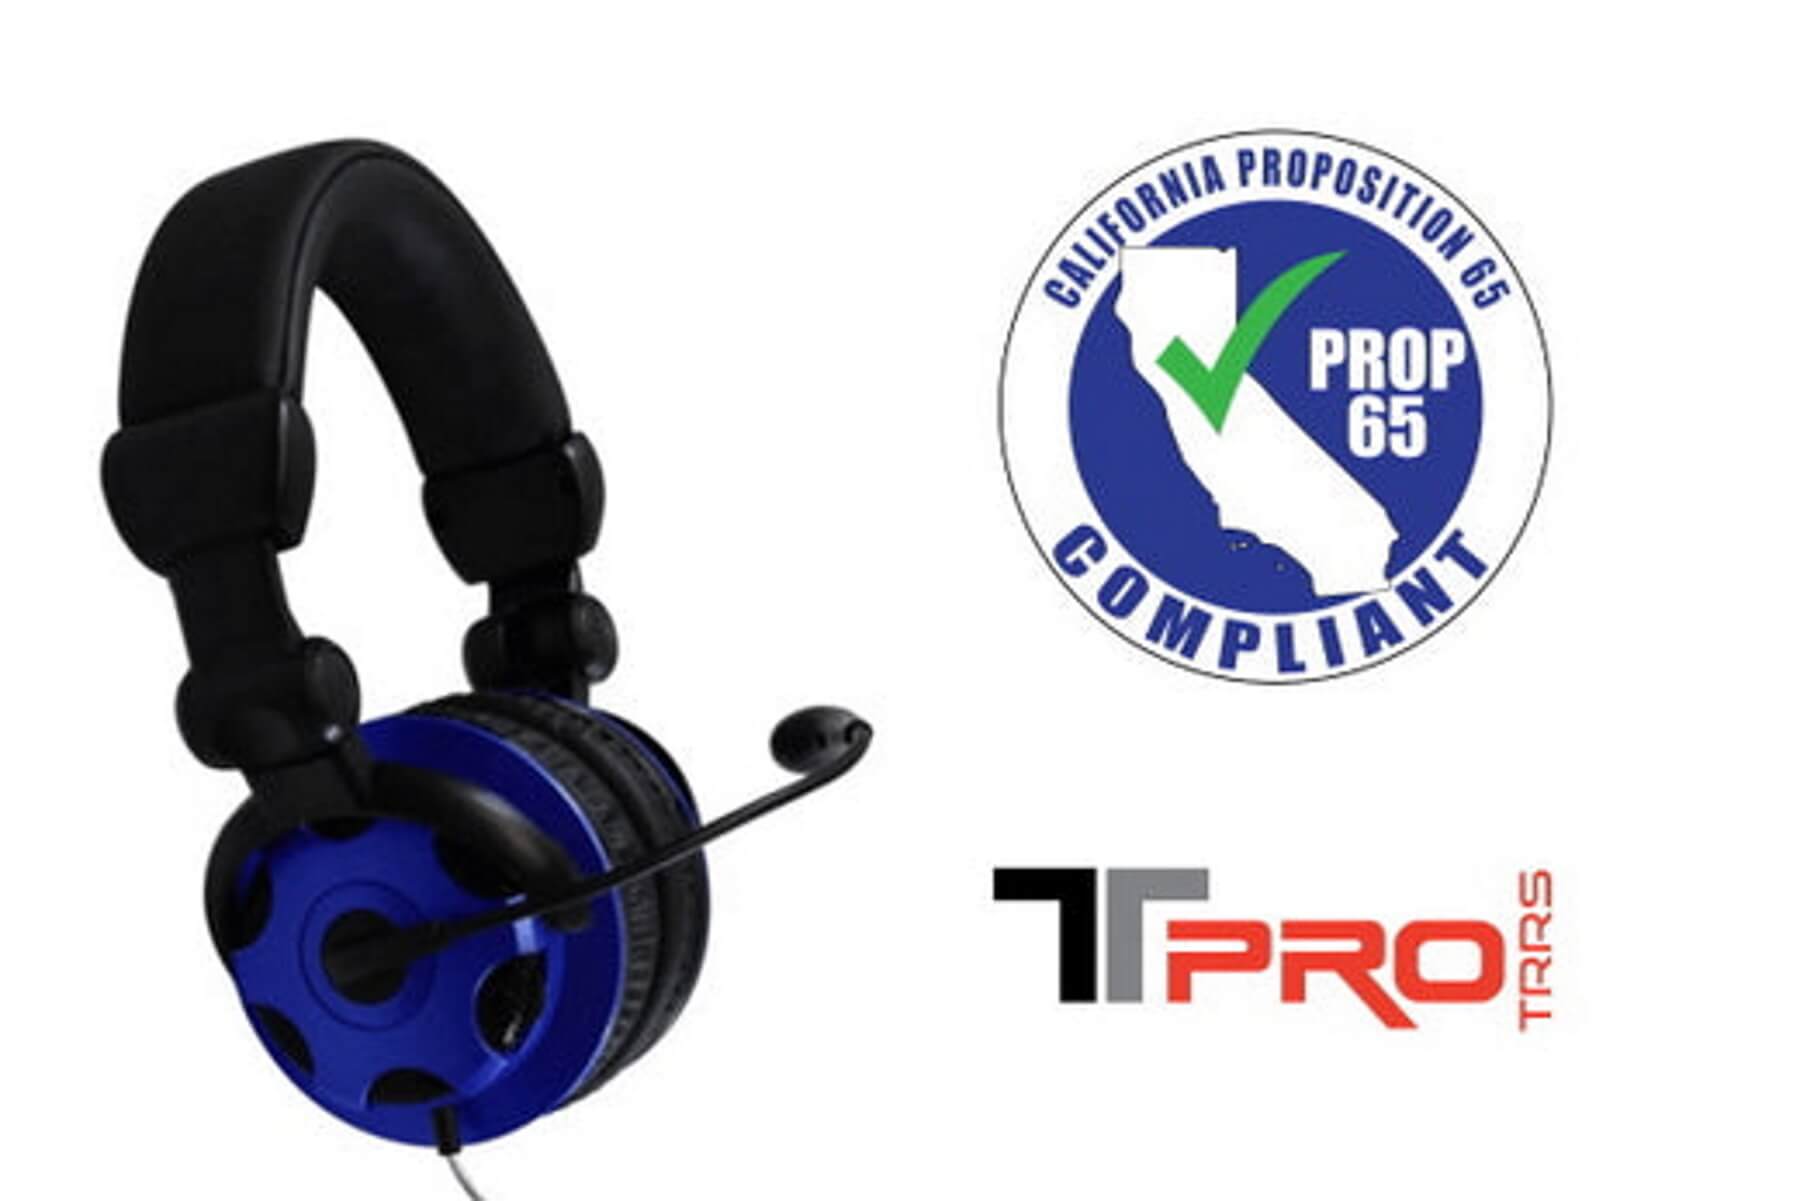 T-PRO School Headset with Noise-Cancelling Mic is perfect when you need to focus on work or study. It is lightweight, flexible, and great for hours of comfortable use.